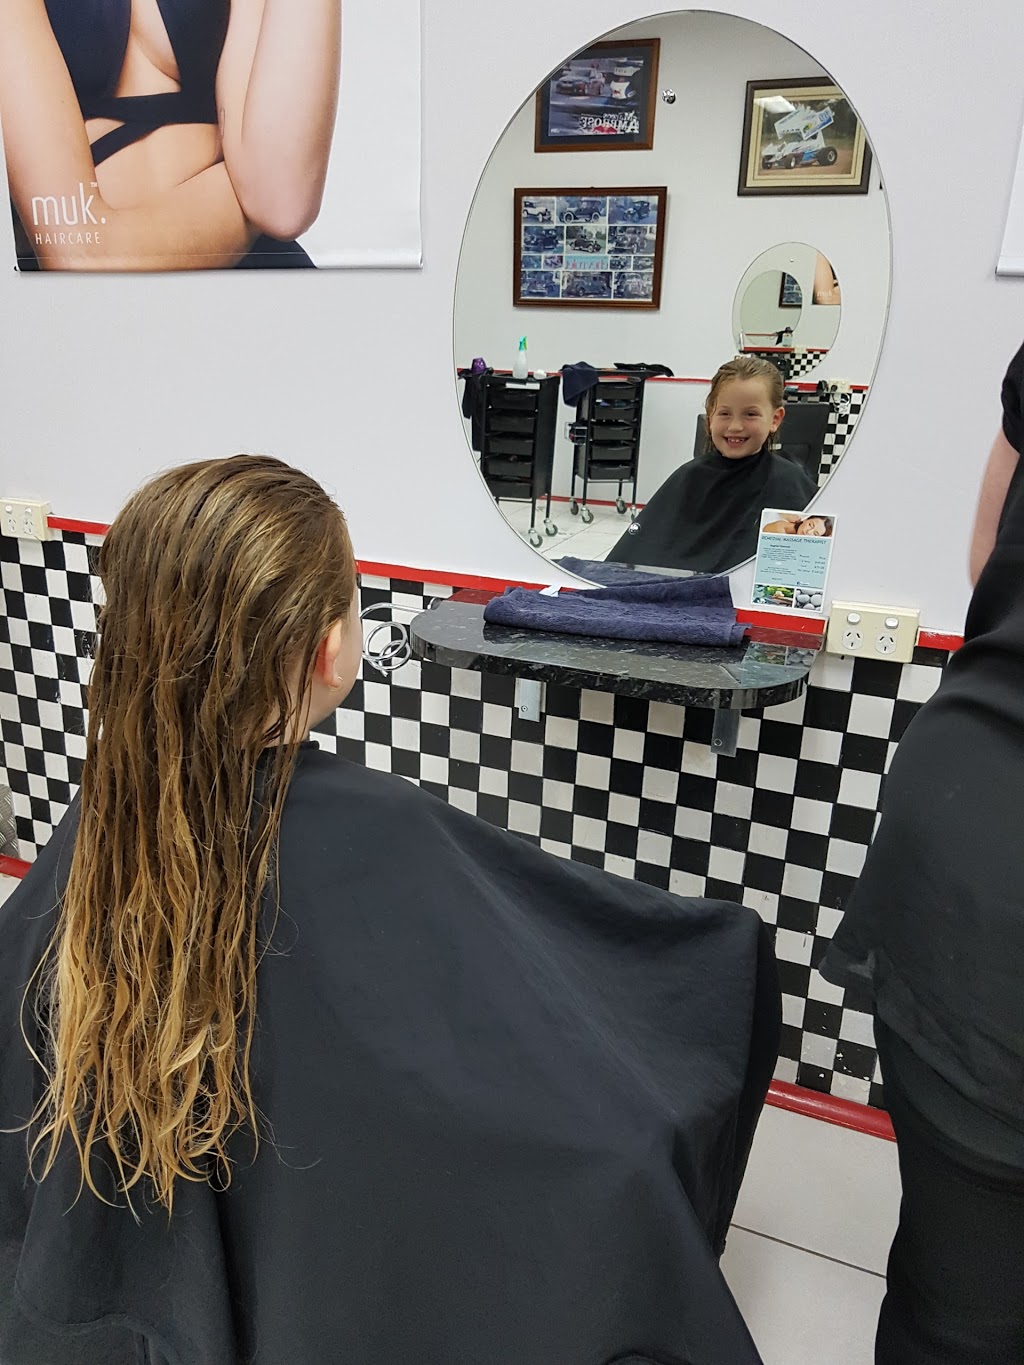 HotRods Hairdressing | hair care | 7/1 Ennis Ave, Cooloongup WA 6168, Australia | 0895286778 OR +61 8 9528 6778